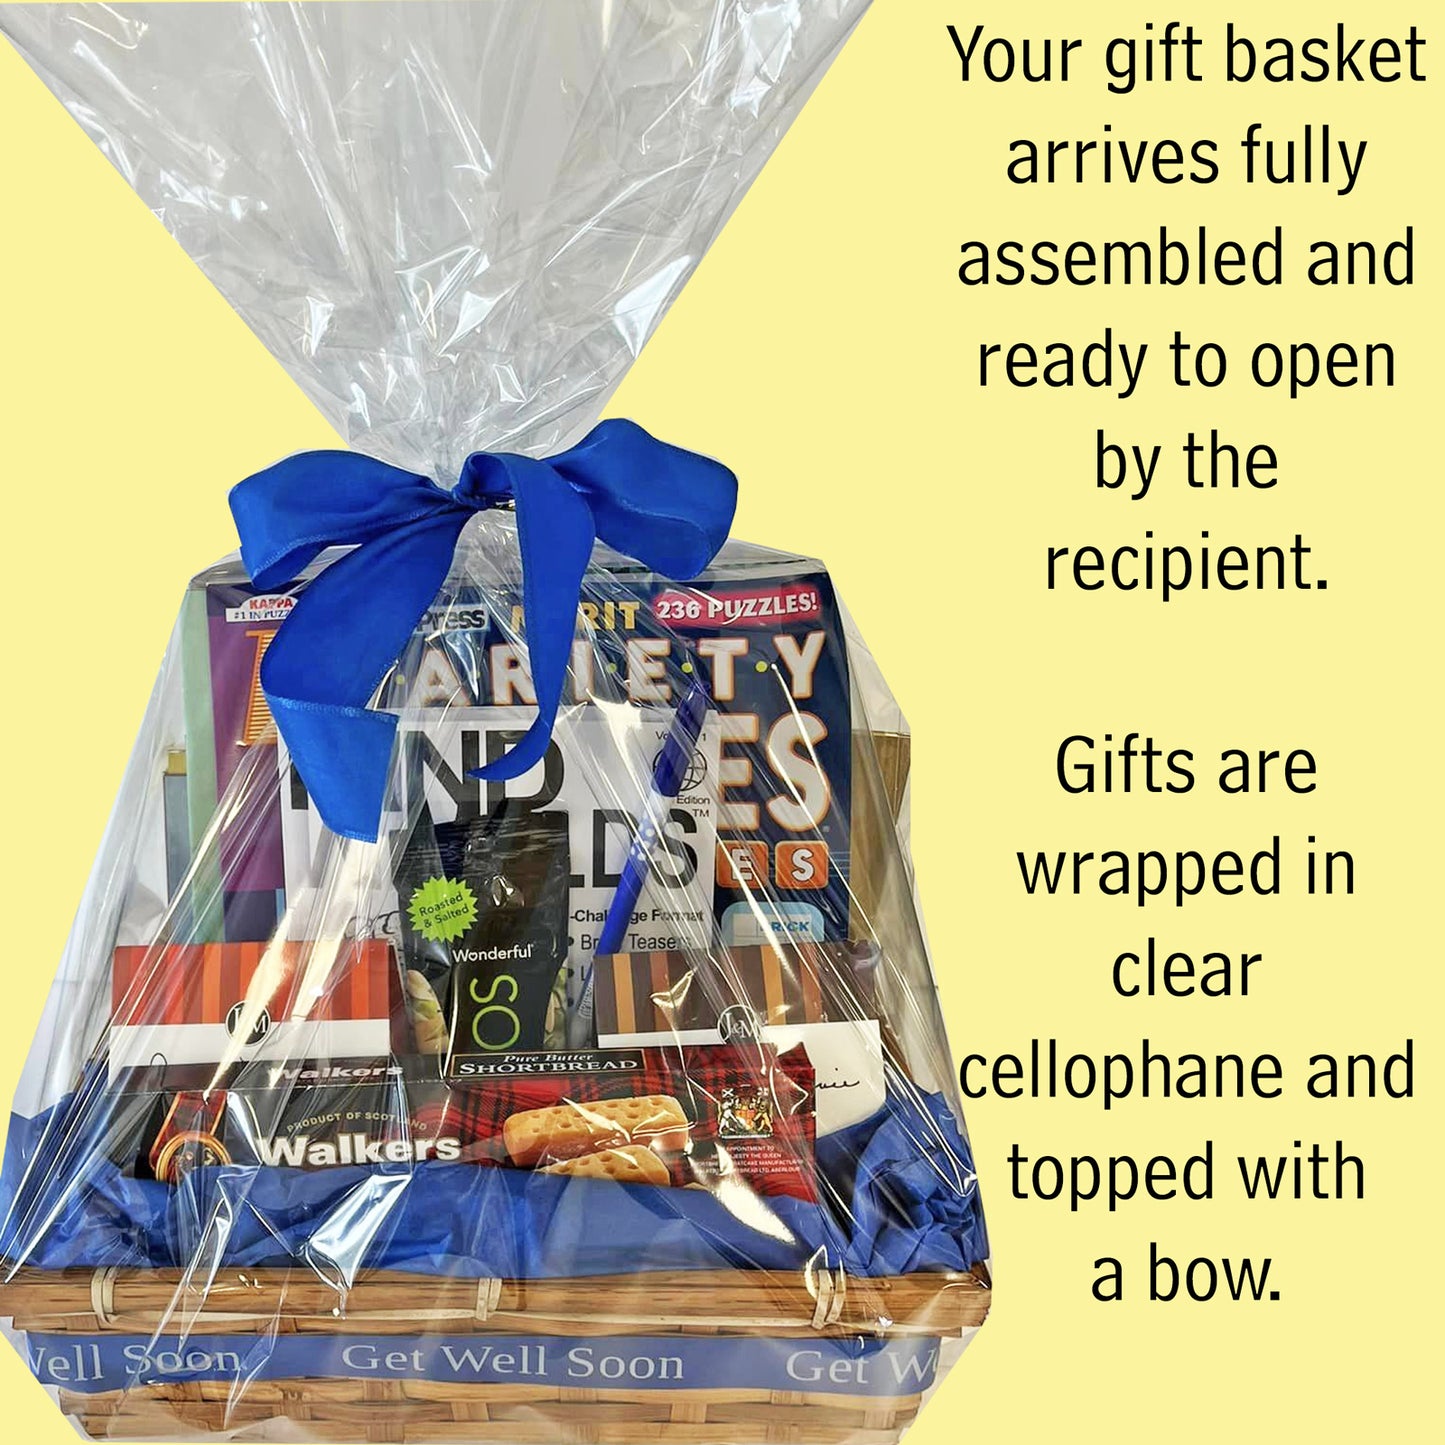 Entertainer Fun Gift Basket for Get Well, Thinking of You, After Surgery, Recovery, Illness Gift Basket has Food and Boredom Busters for Men, Women, Friends and Family